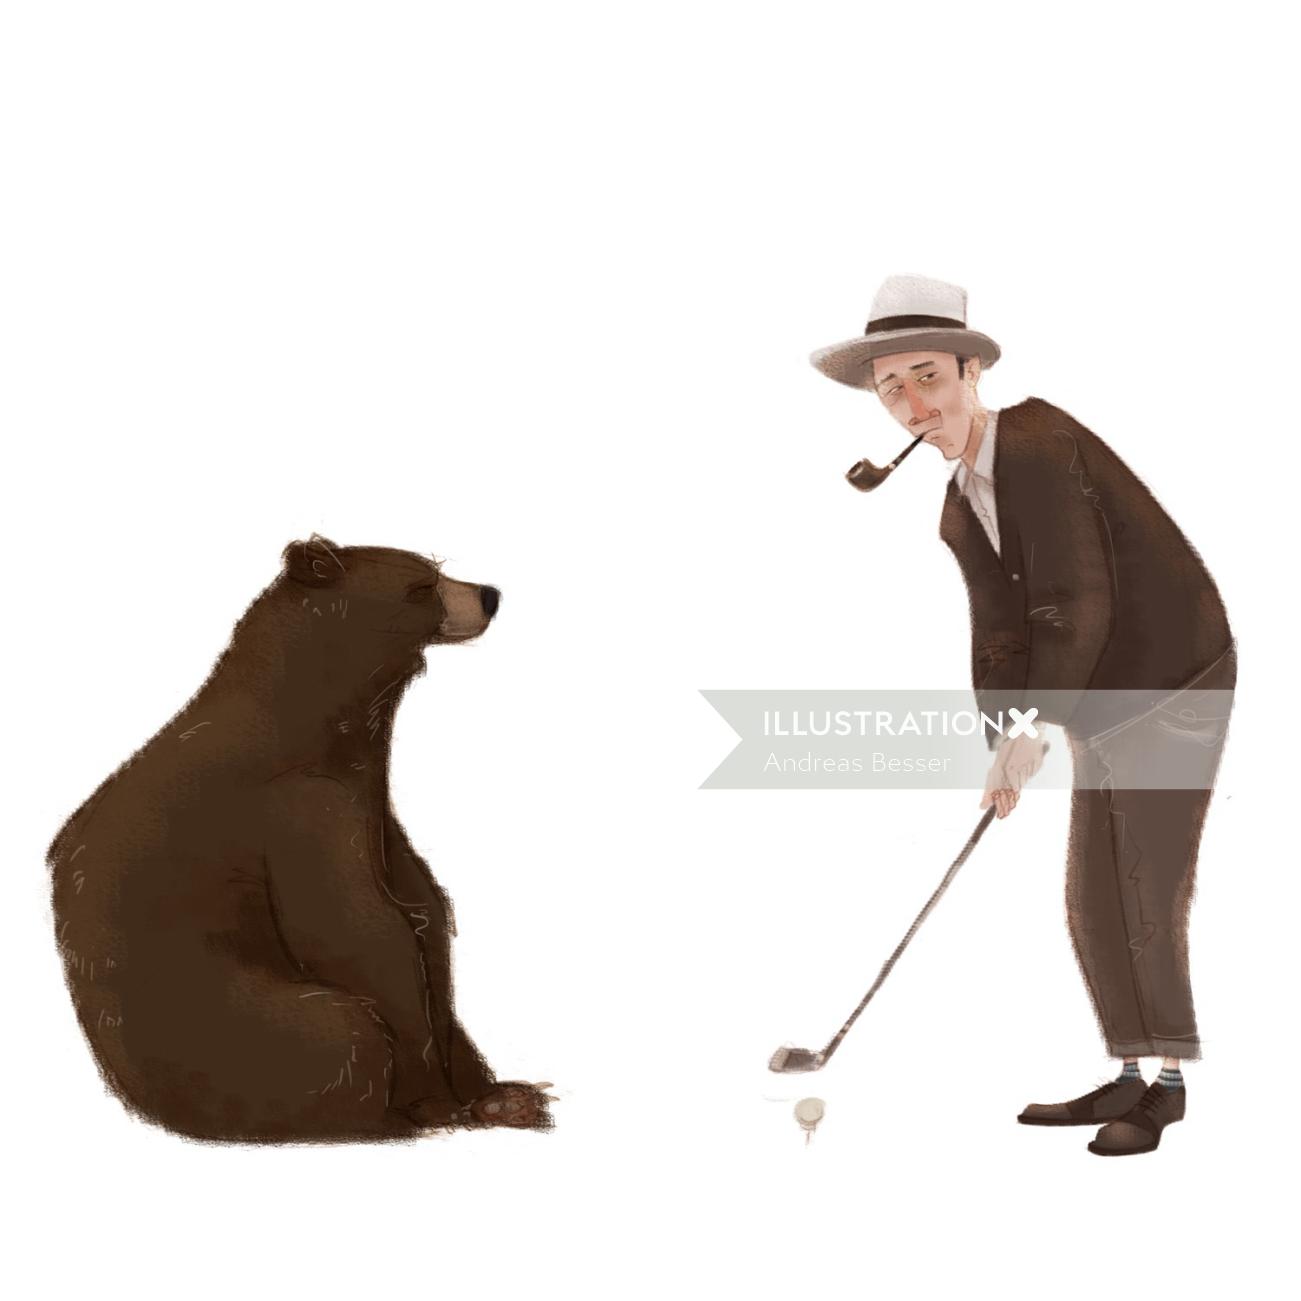 Illustration of bear with man playing golf
